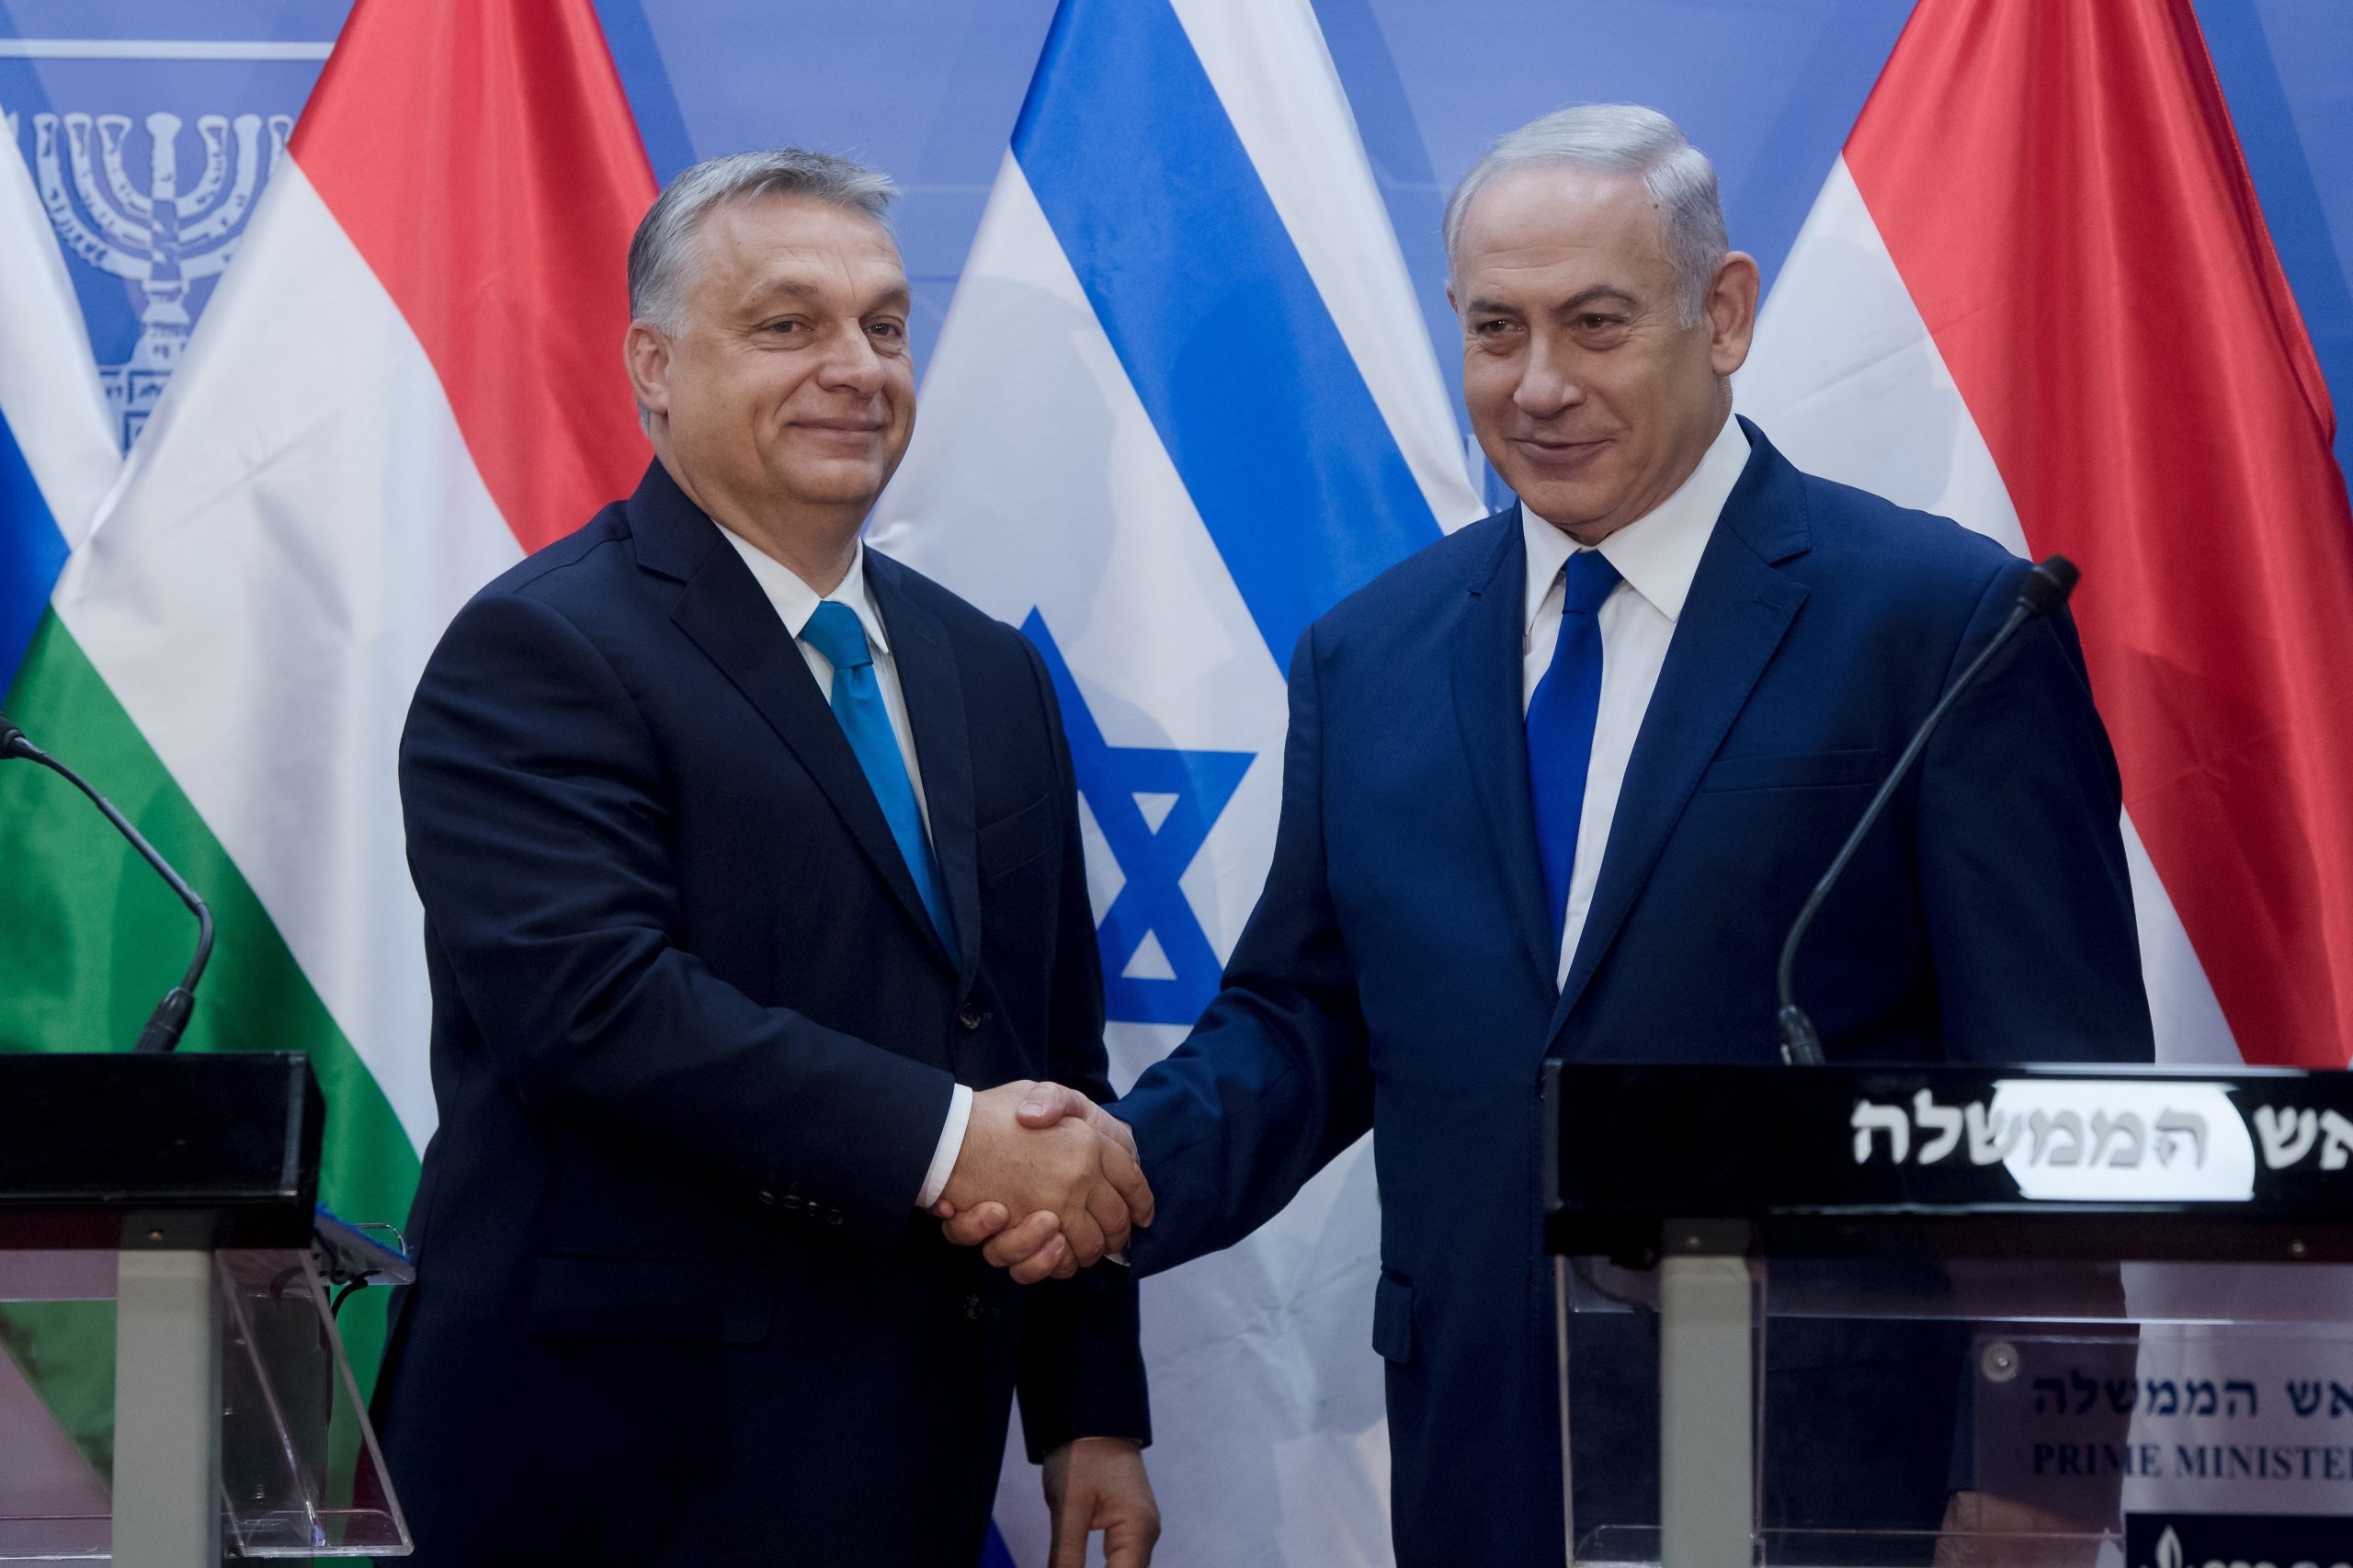 Benjamin Netanyahu visits Hungary as PM Viktor Orbán's flirtation with  far-right unnerves local Jews, The Independent